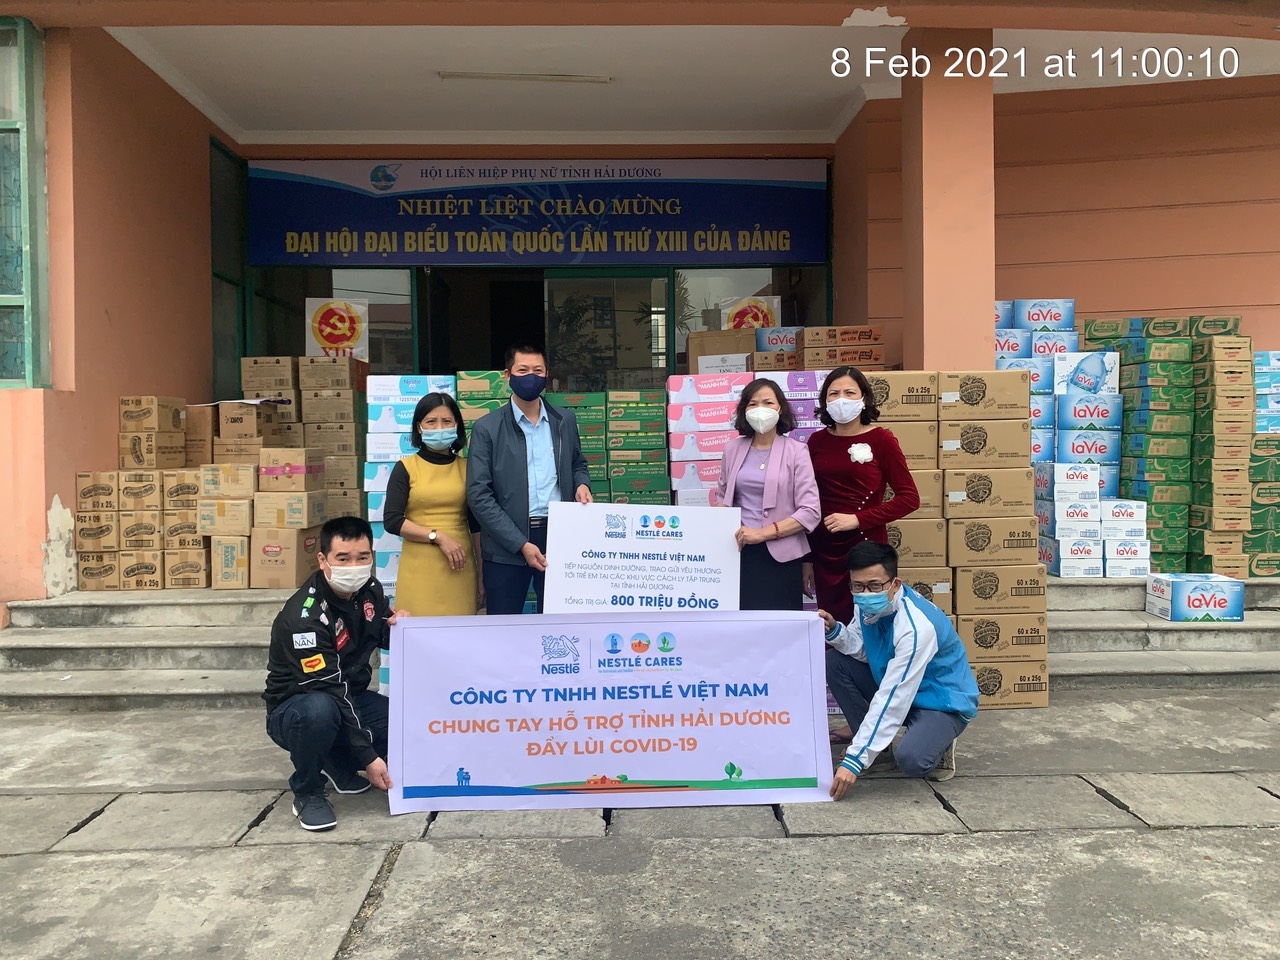 Nestlé Vietnam gifts 100,000 nutritional products to children in COVID-19 danger zones